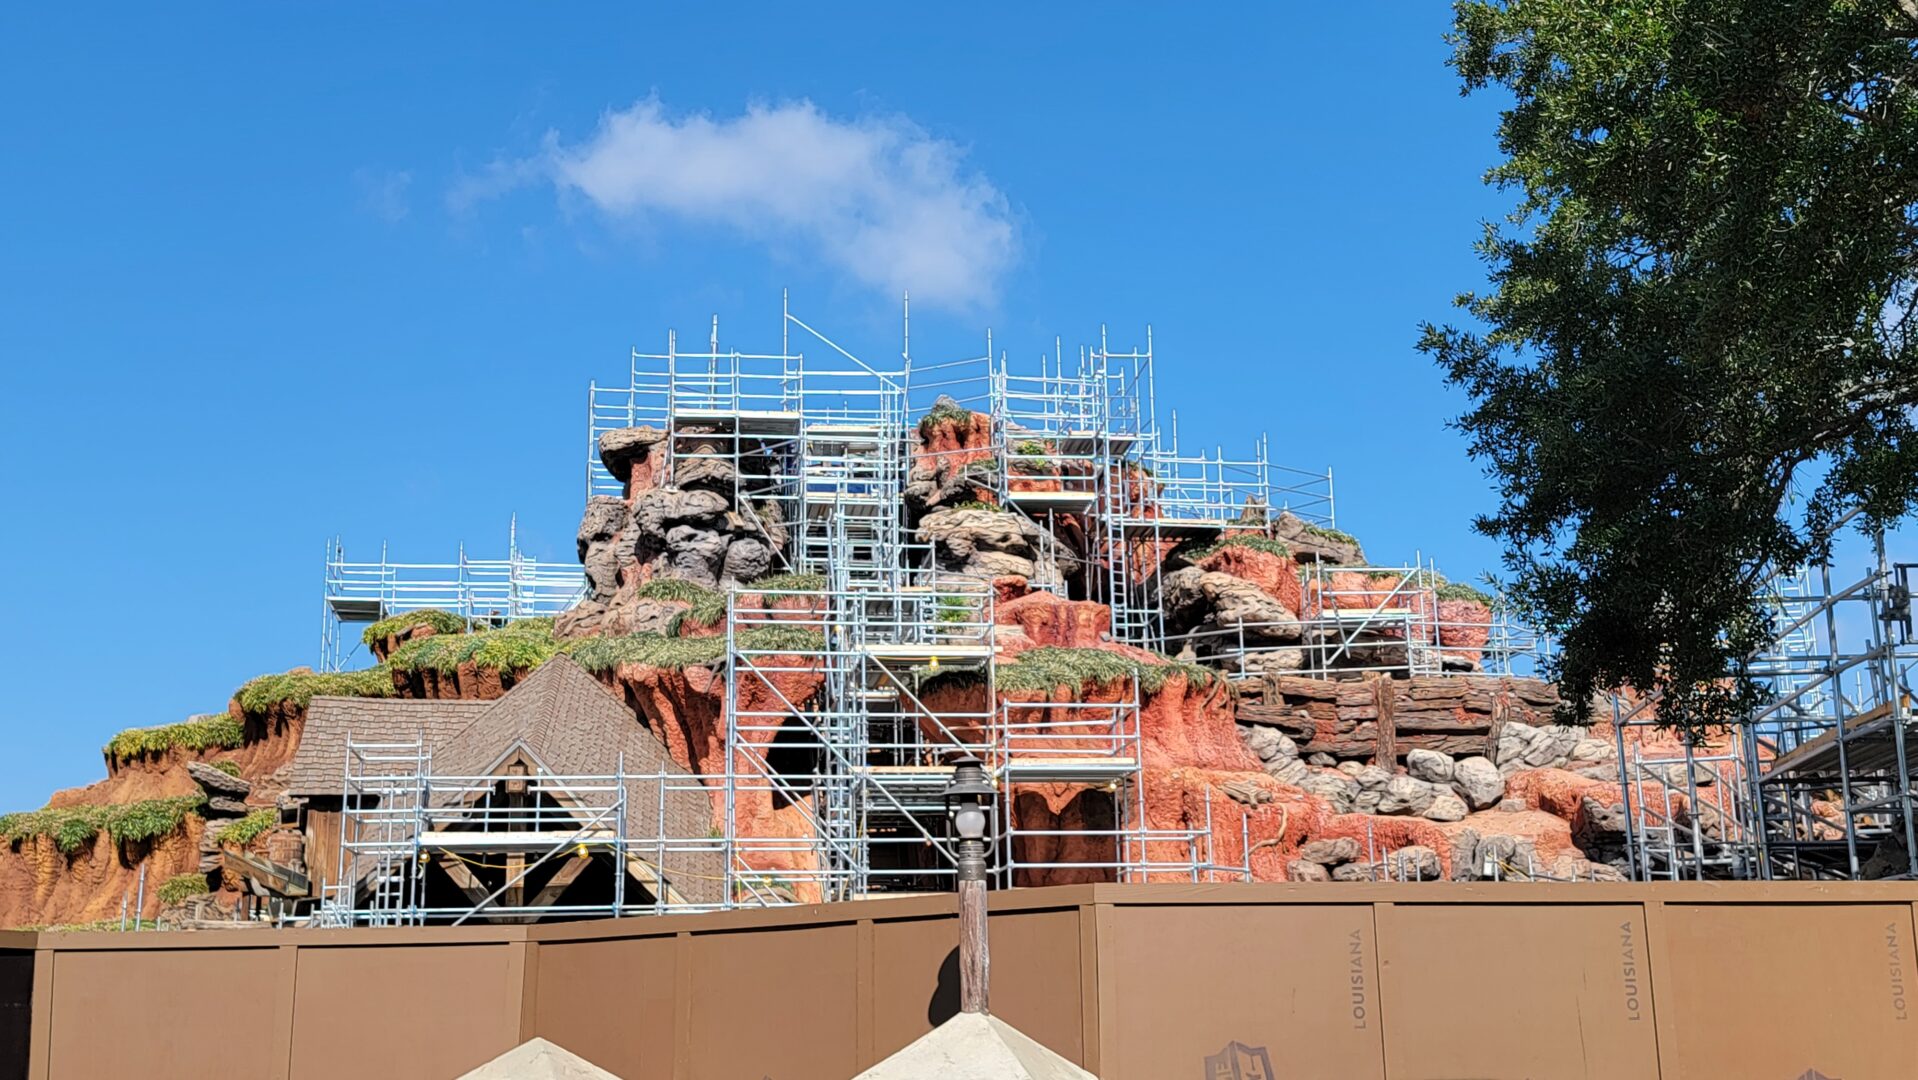 Top of Splash Mountain Gone as Work Continues on Tiana’s Bayou Adventure